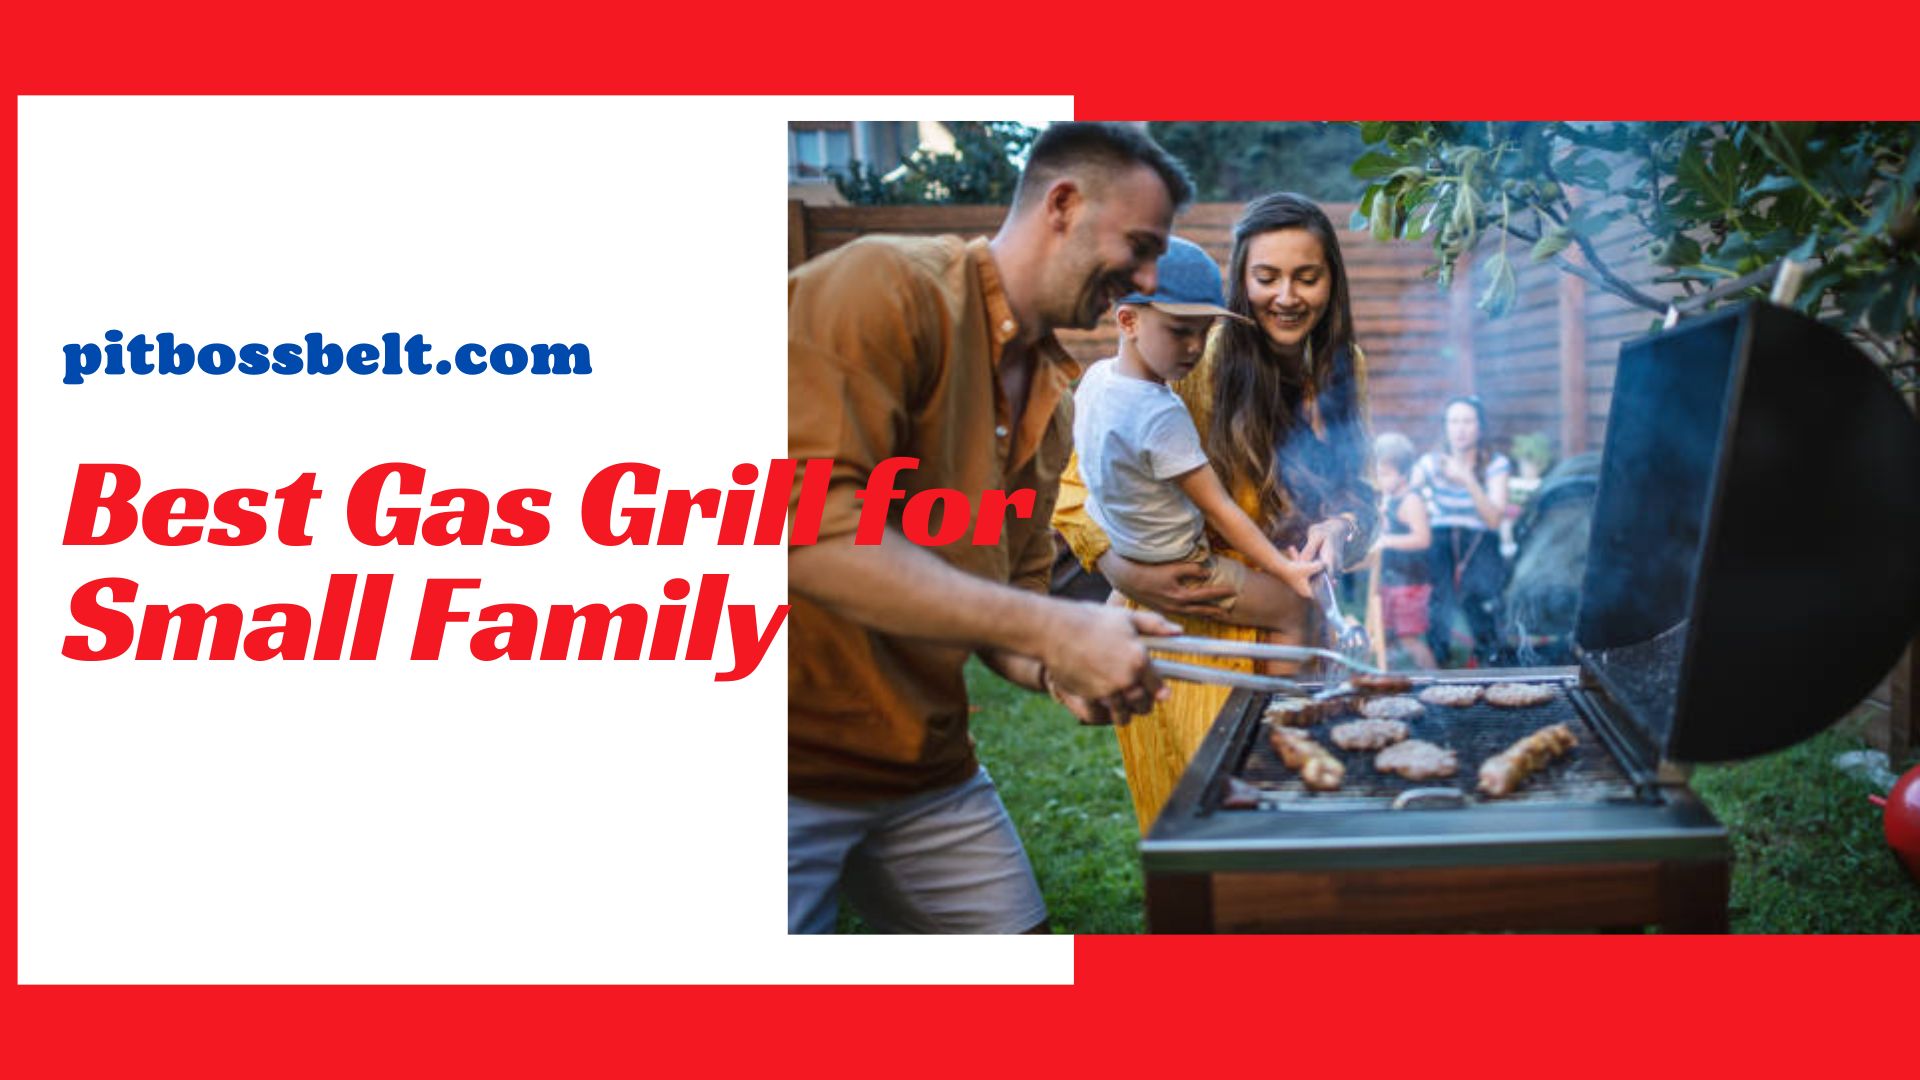 Best Gas Grill for Small Family